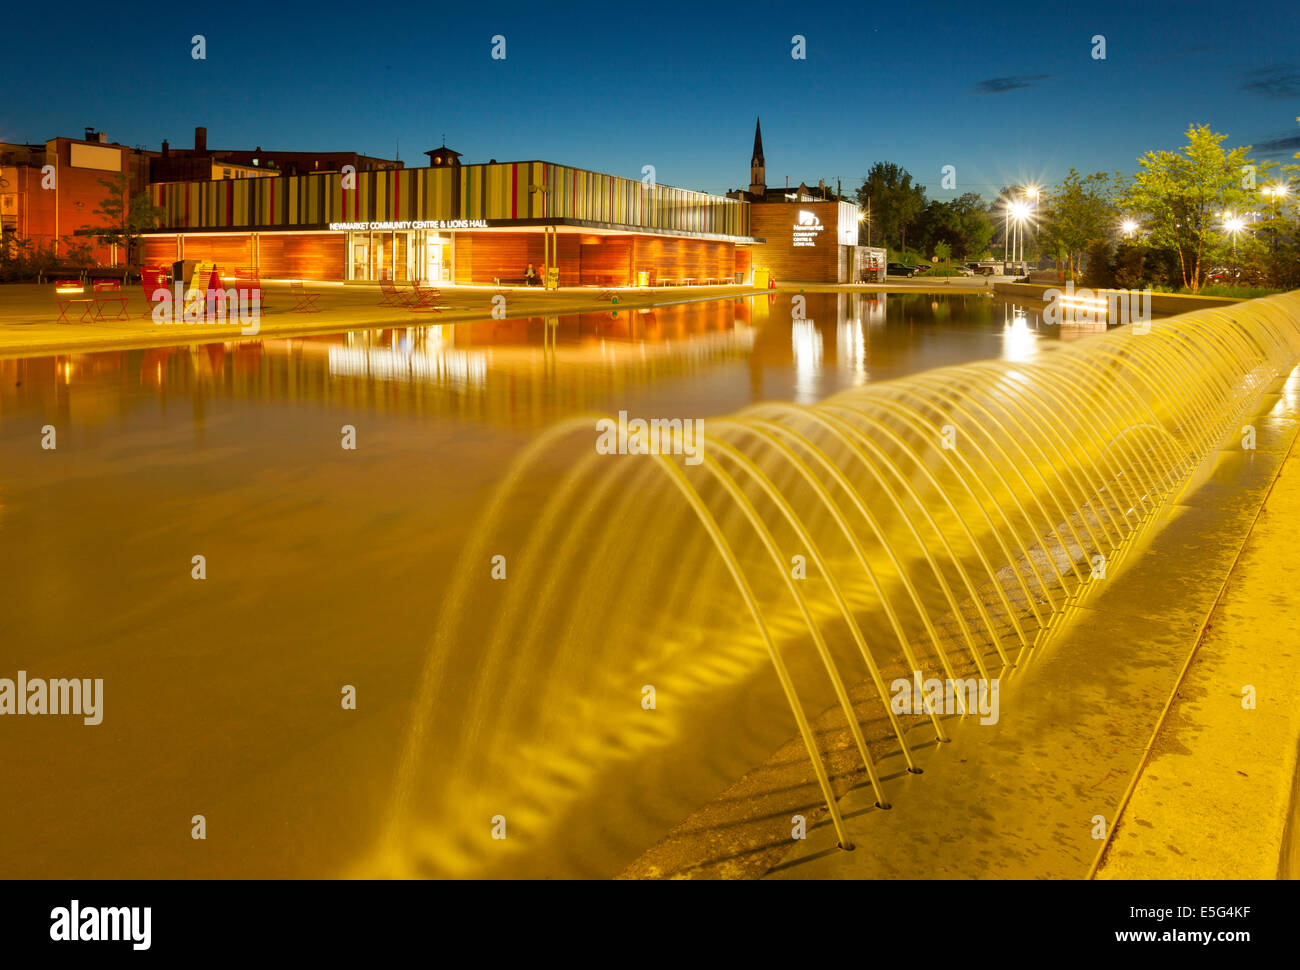 The Newmarket Community Centre with the water feature in the foreground bathed in yellow light at dusk in downtown Newmarket, On Stock Photo